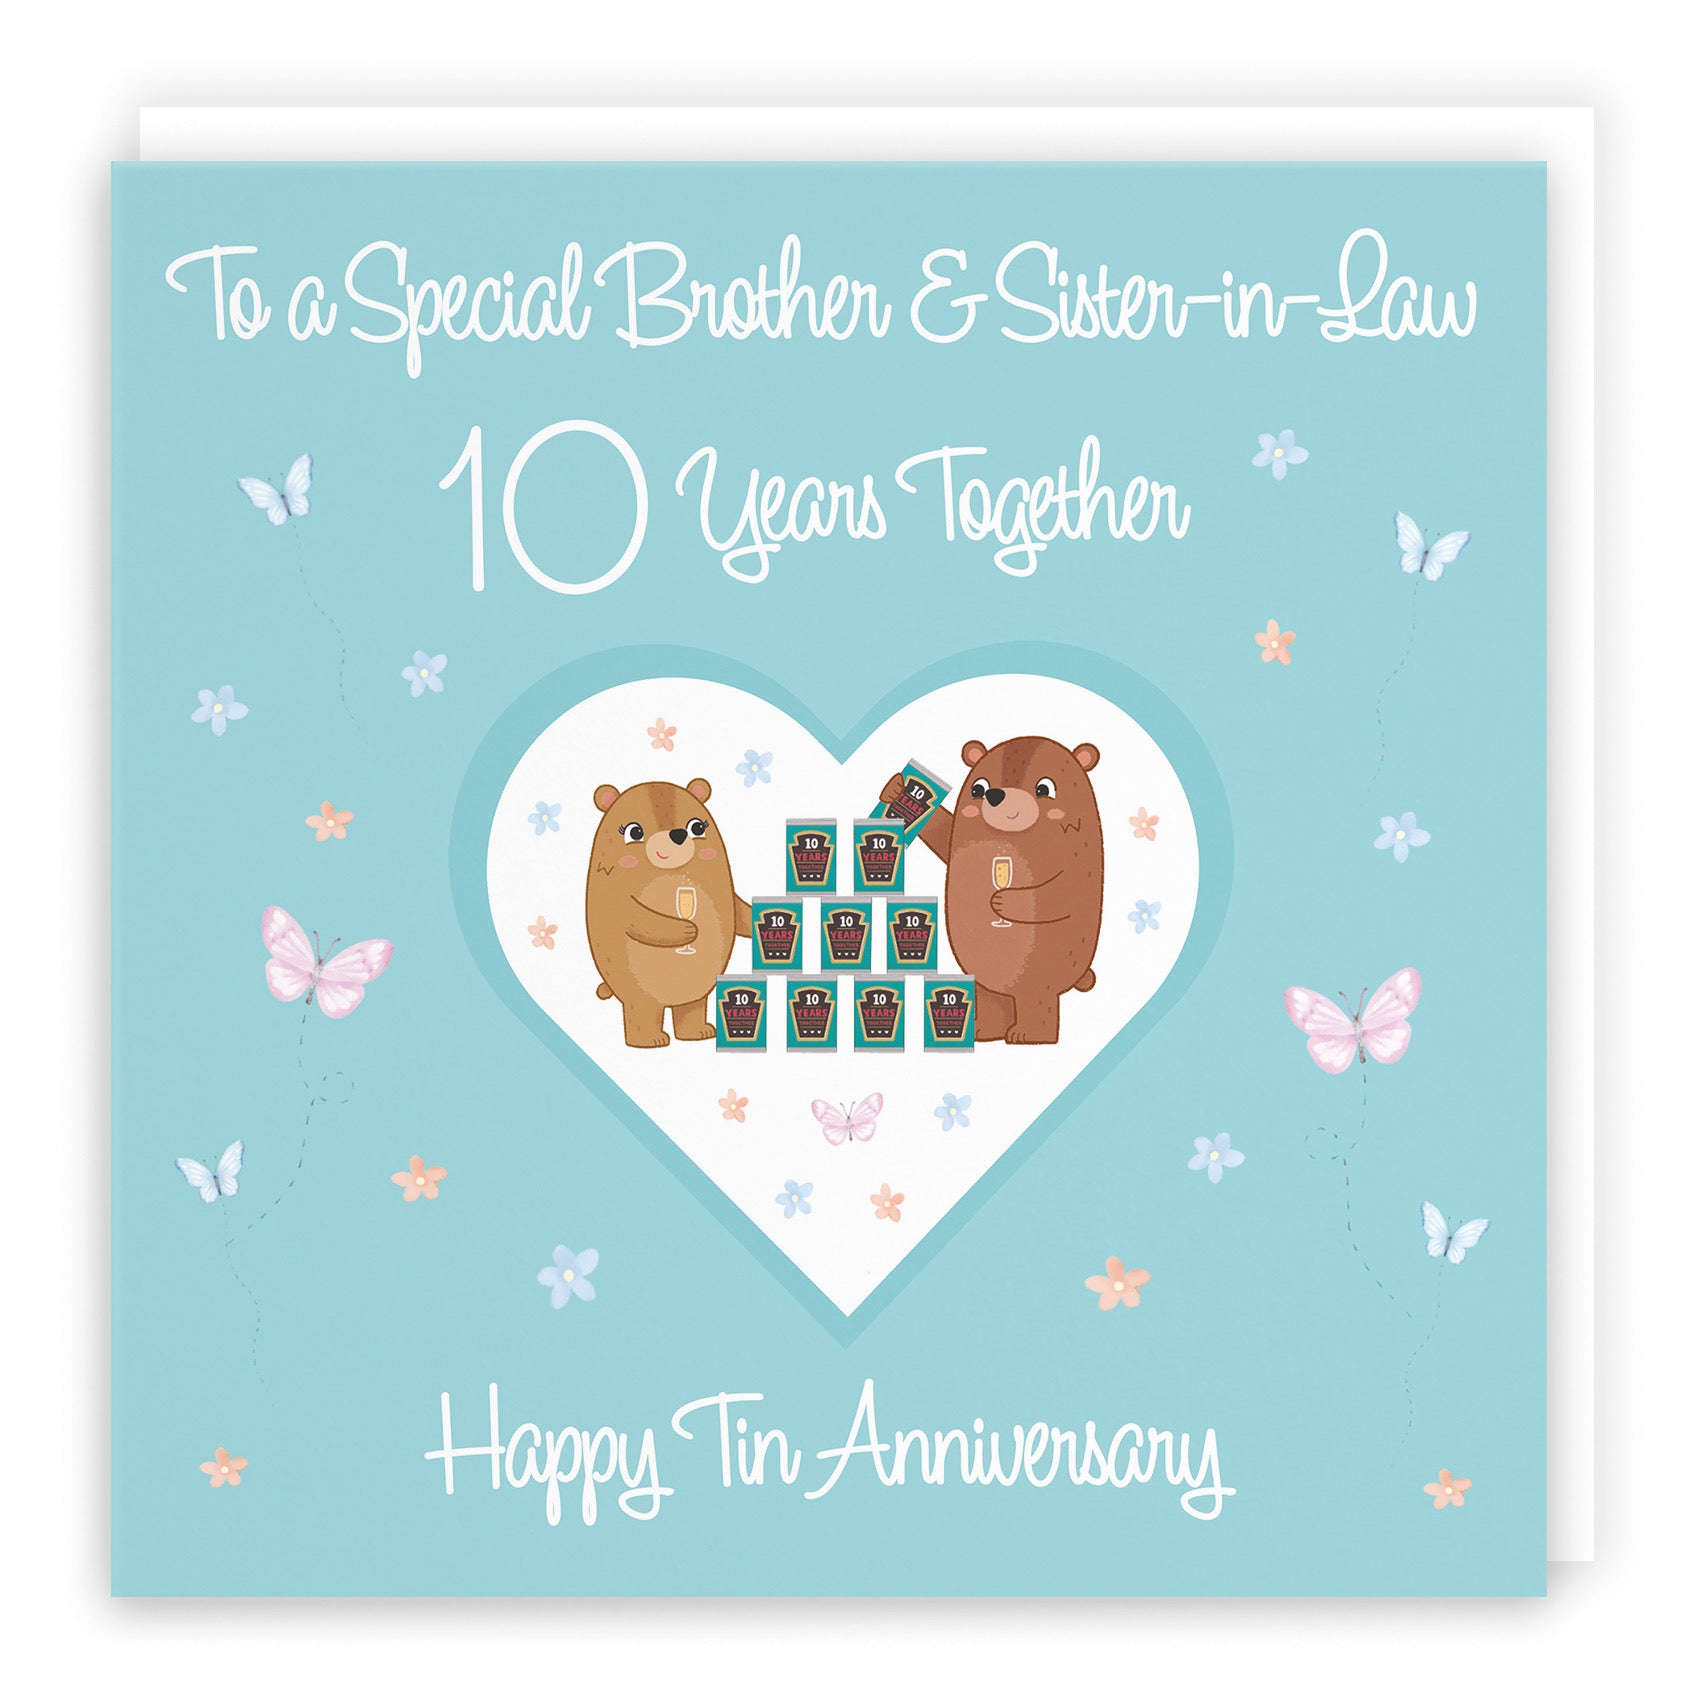 Large Brother & Sister-in-Law 10th Anniversary Card Romantic Meadows - Default Title (B0CXY4NBQK)